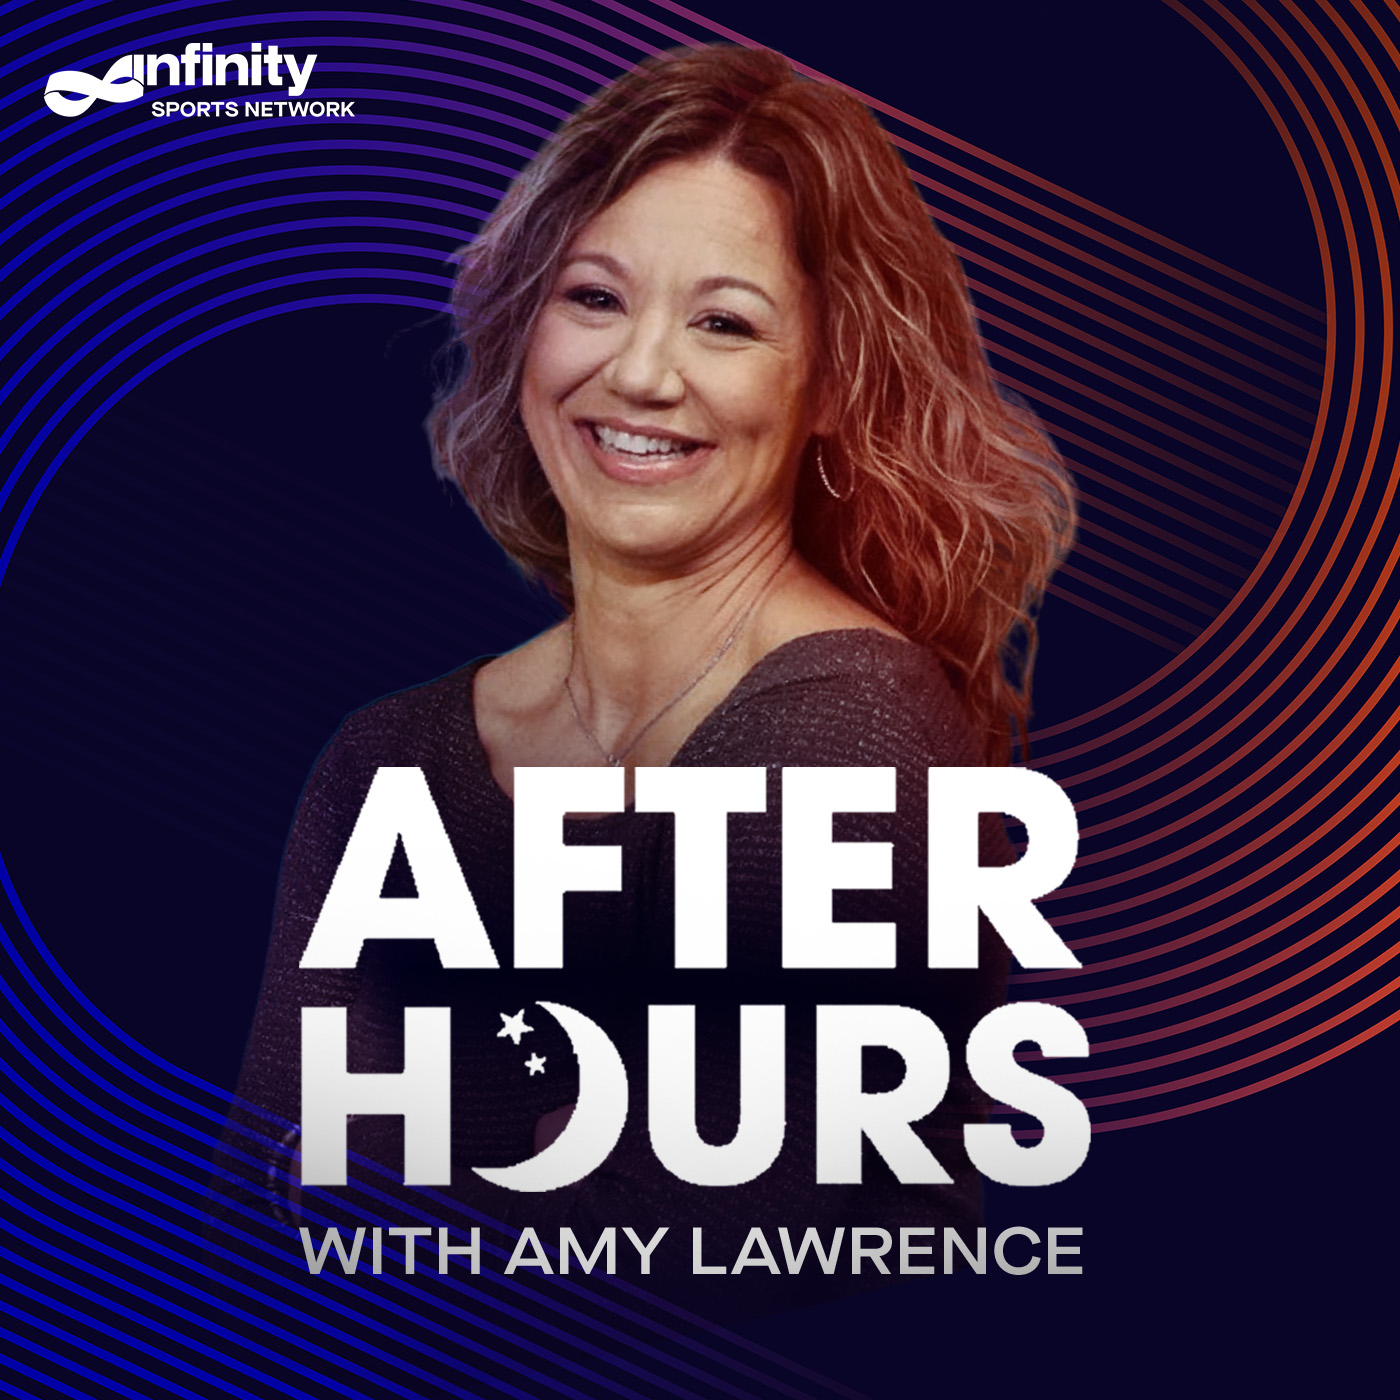 7/9/20 After Hours with Amy Lawrence PODCAST: Hour 3